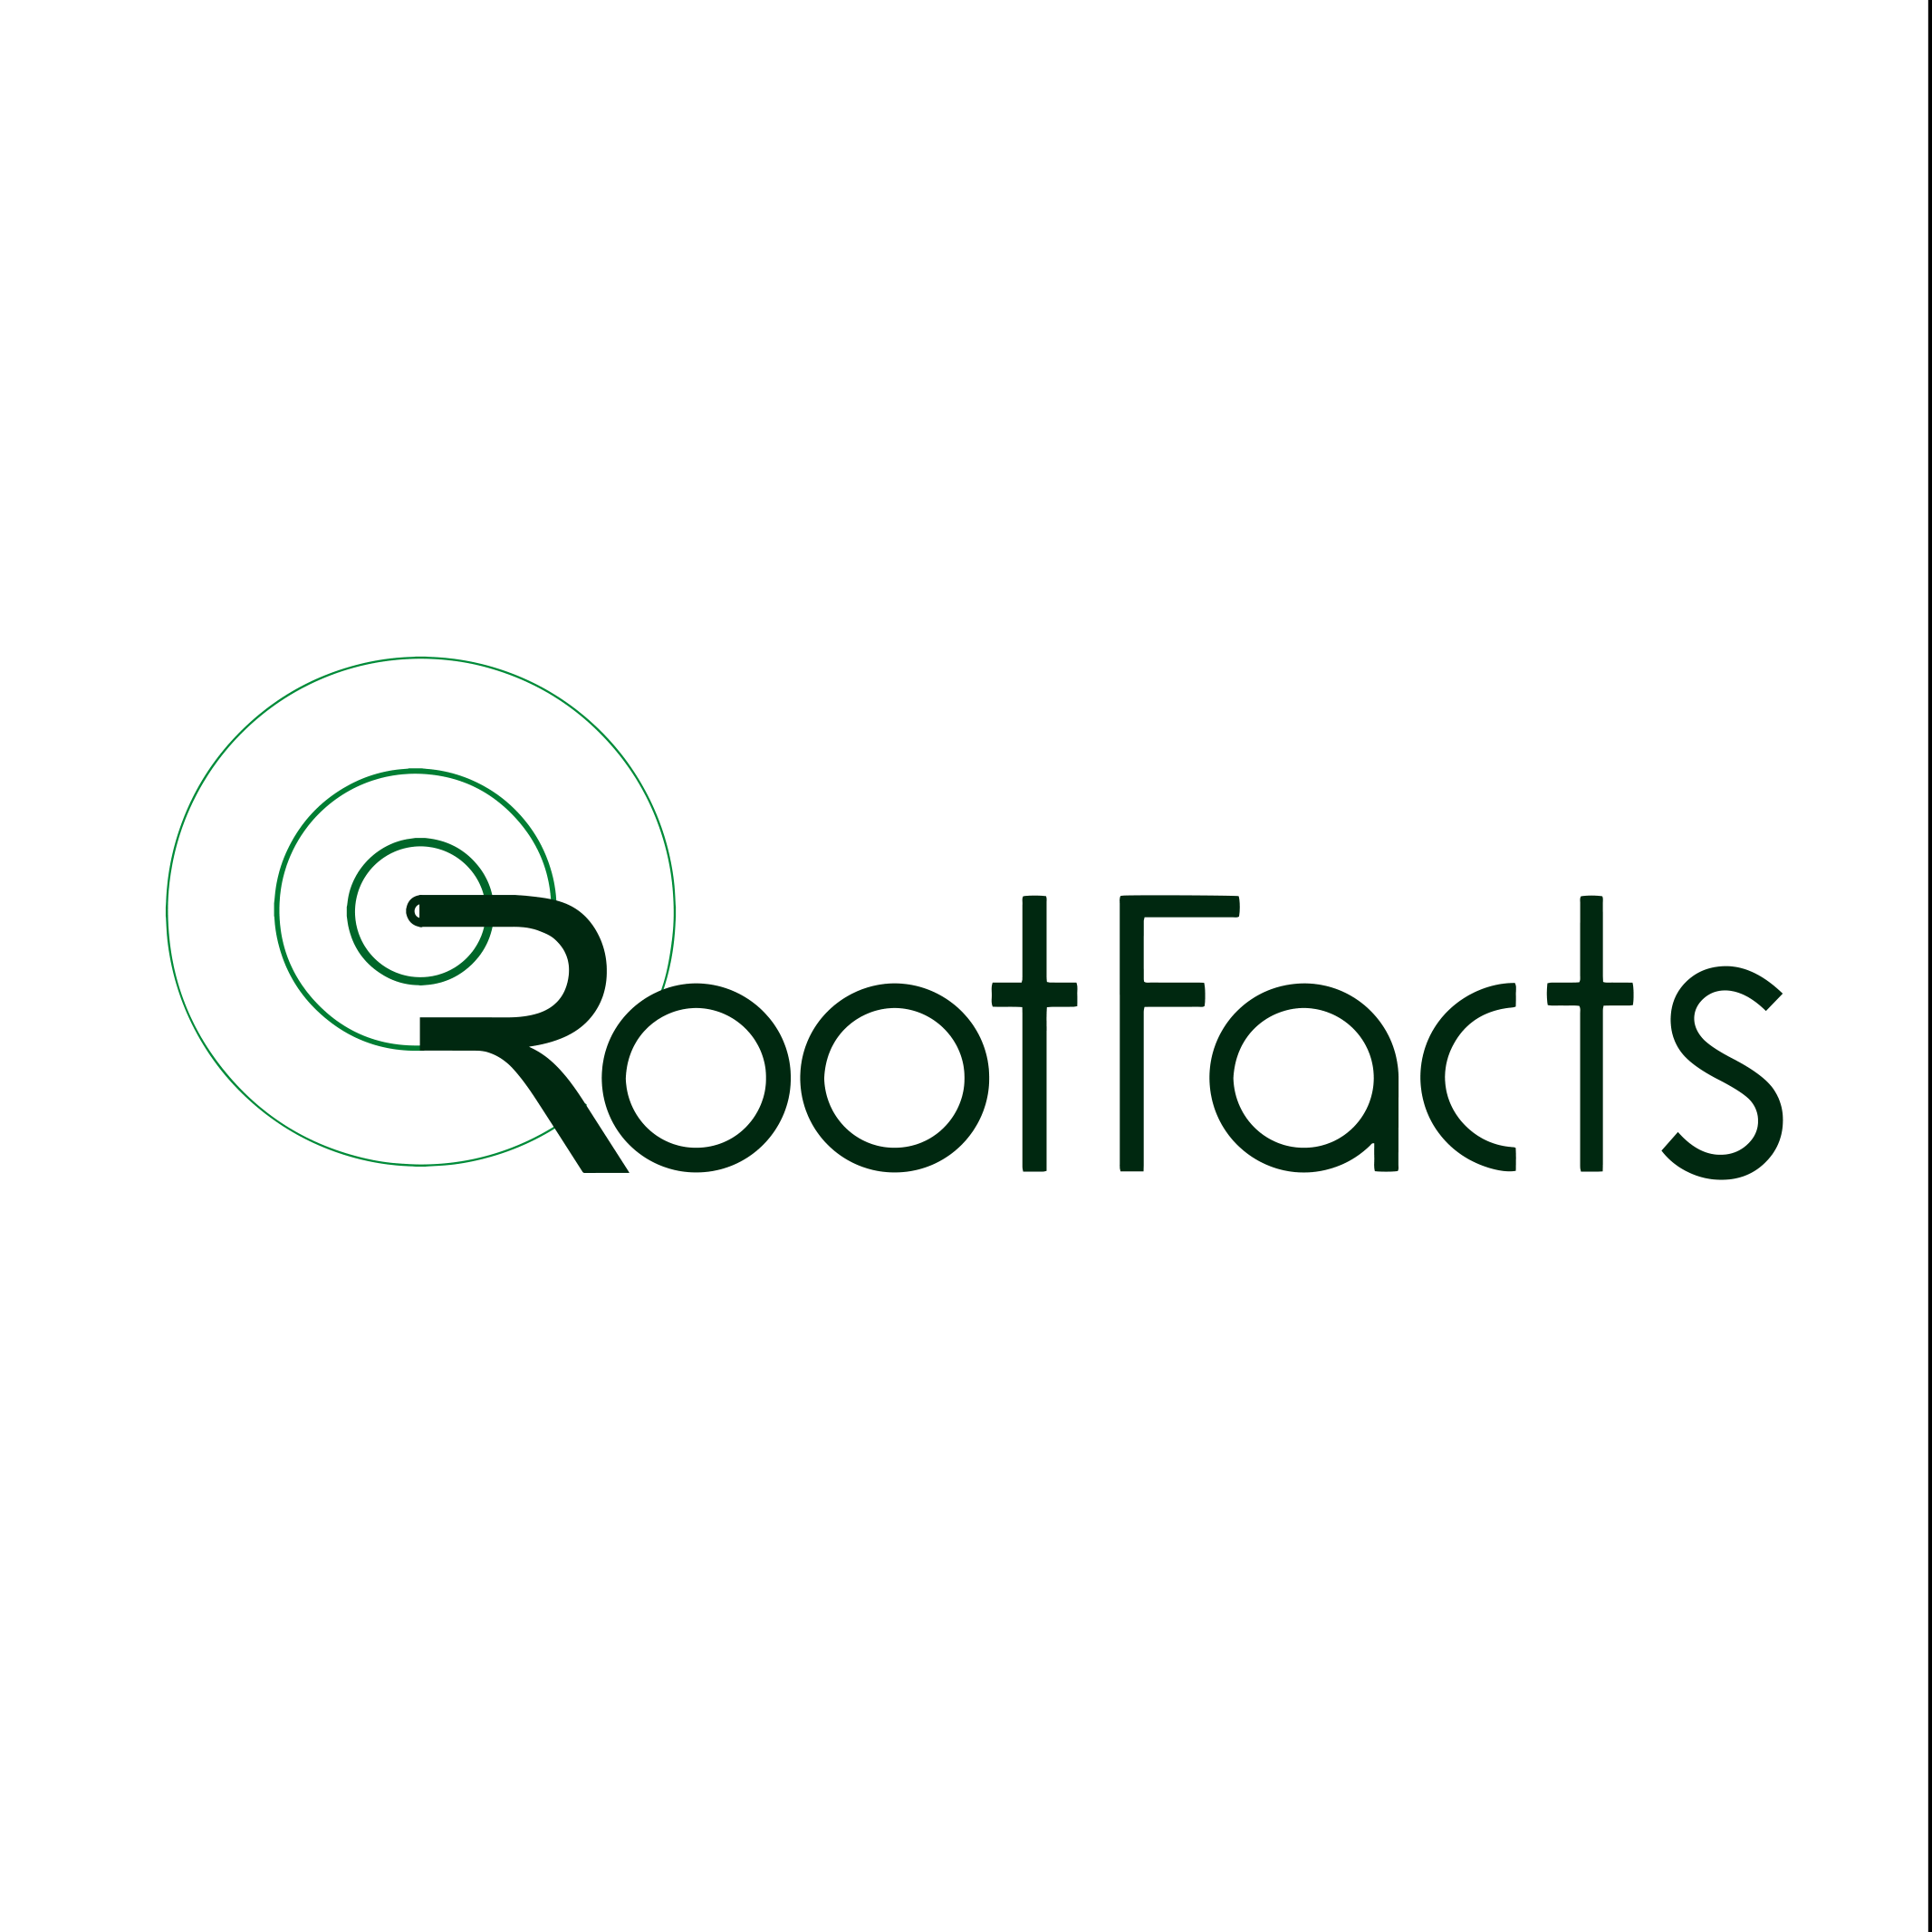 Rootfacts logo